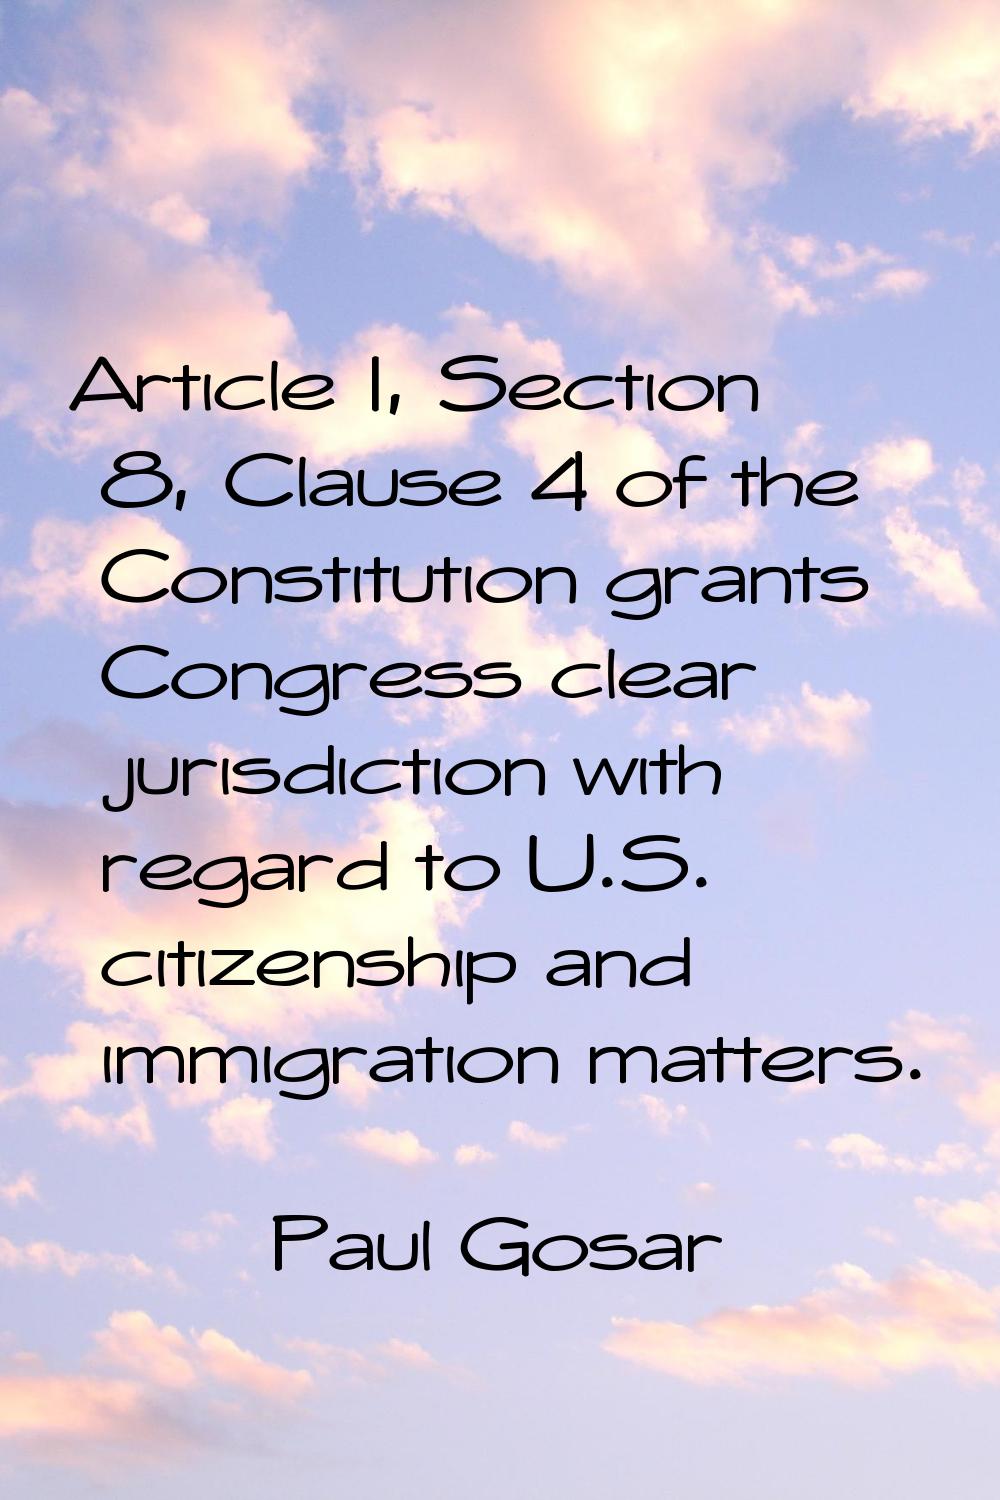 Article I, Section 8, Clause 4 of the Constitution grants Congress clear jurisdiction with regard t